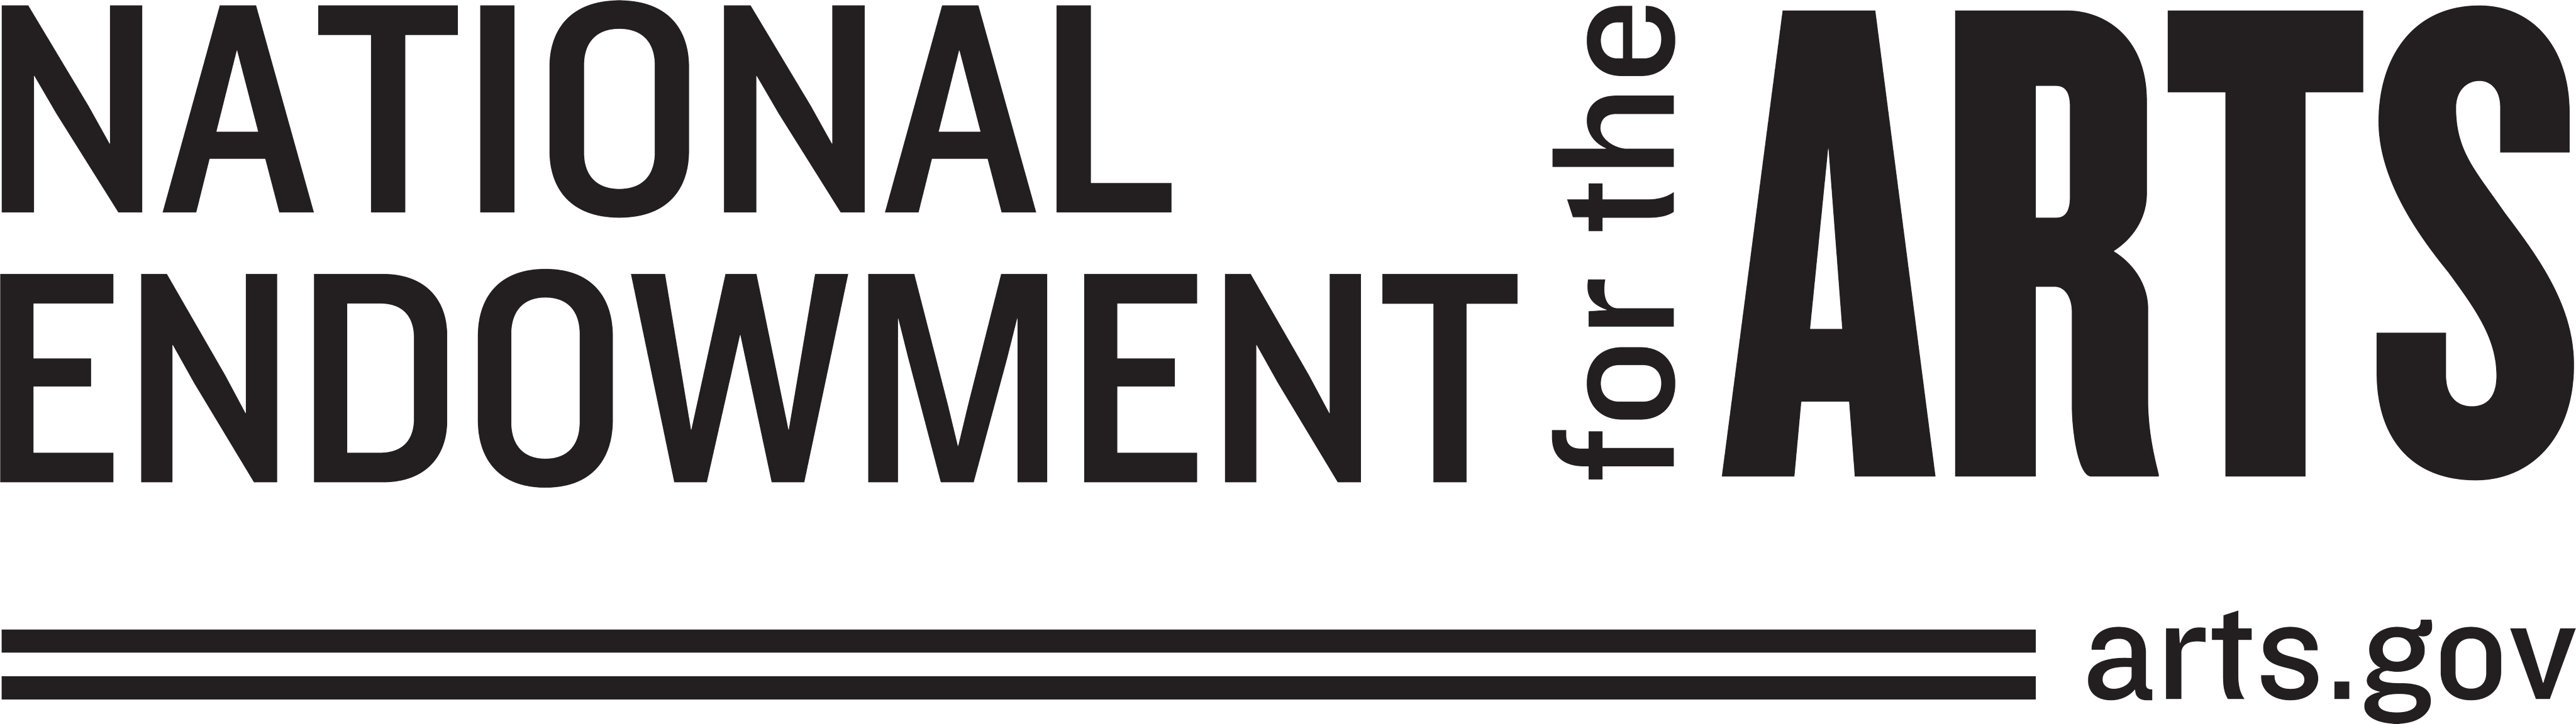 logo reads 'national endowment for the arts, arts.gov'